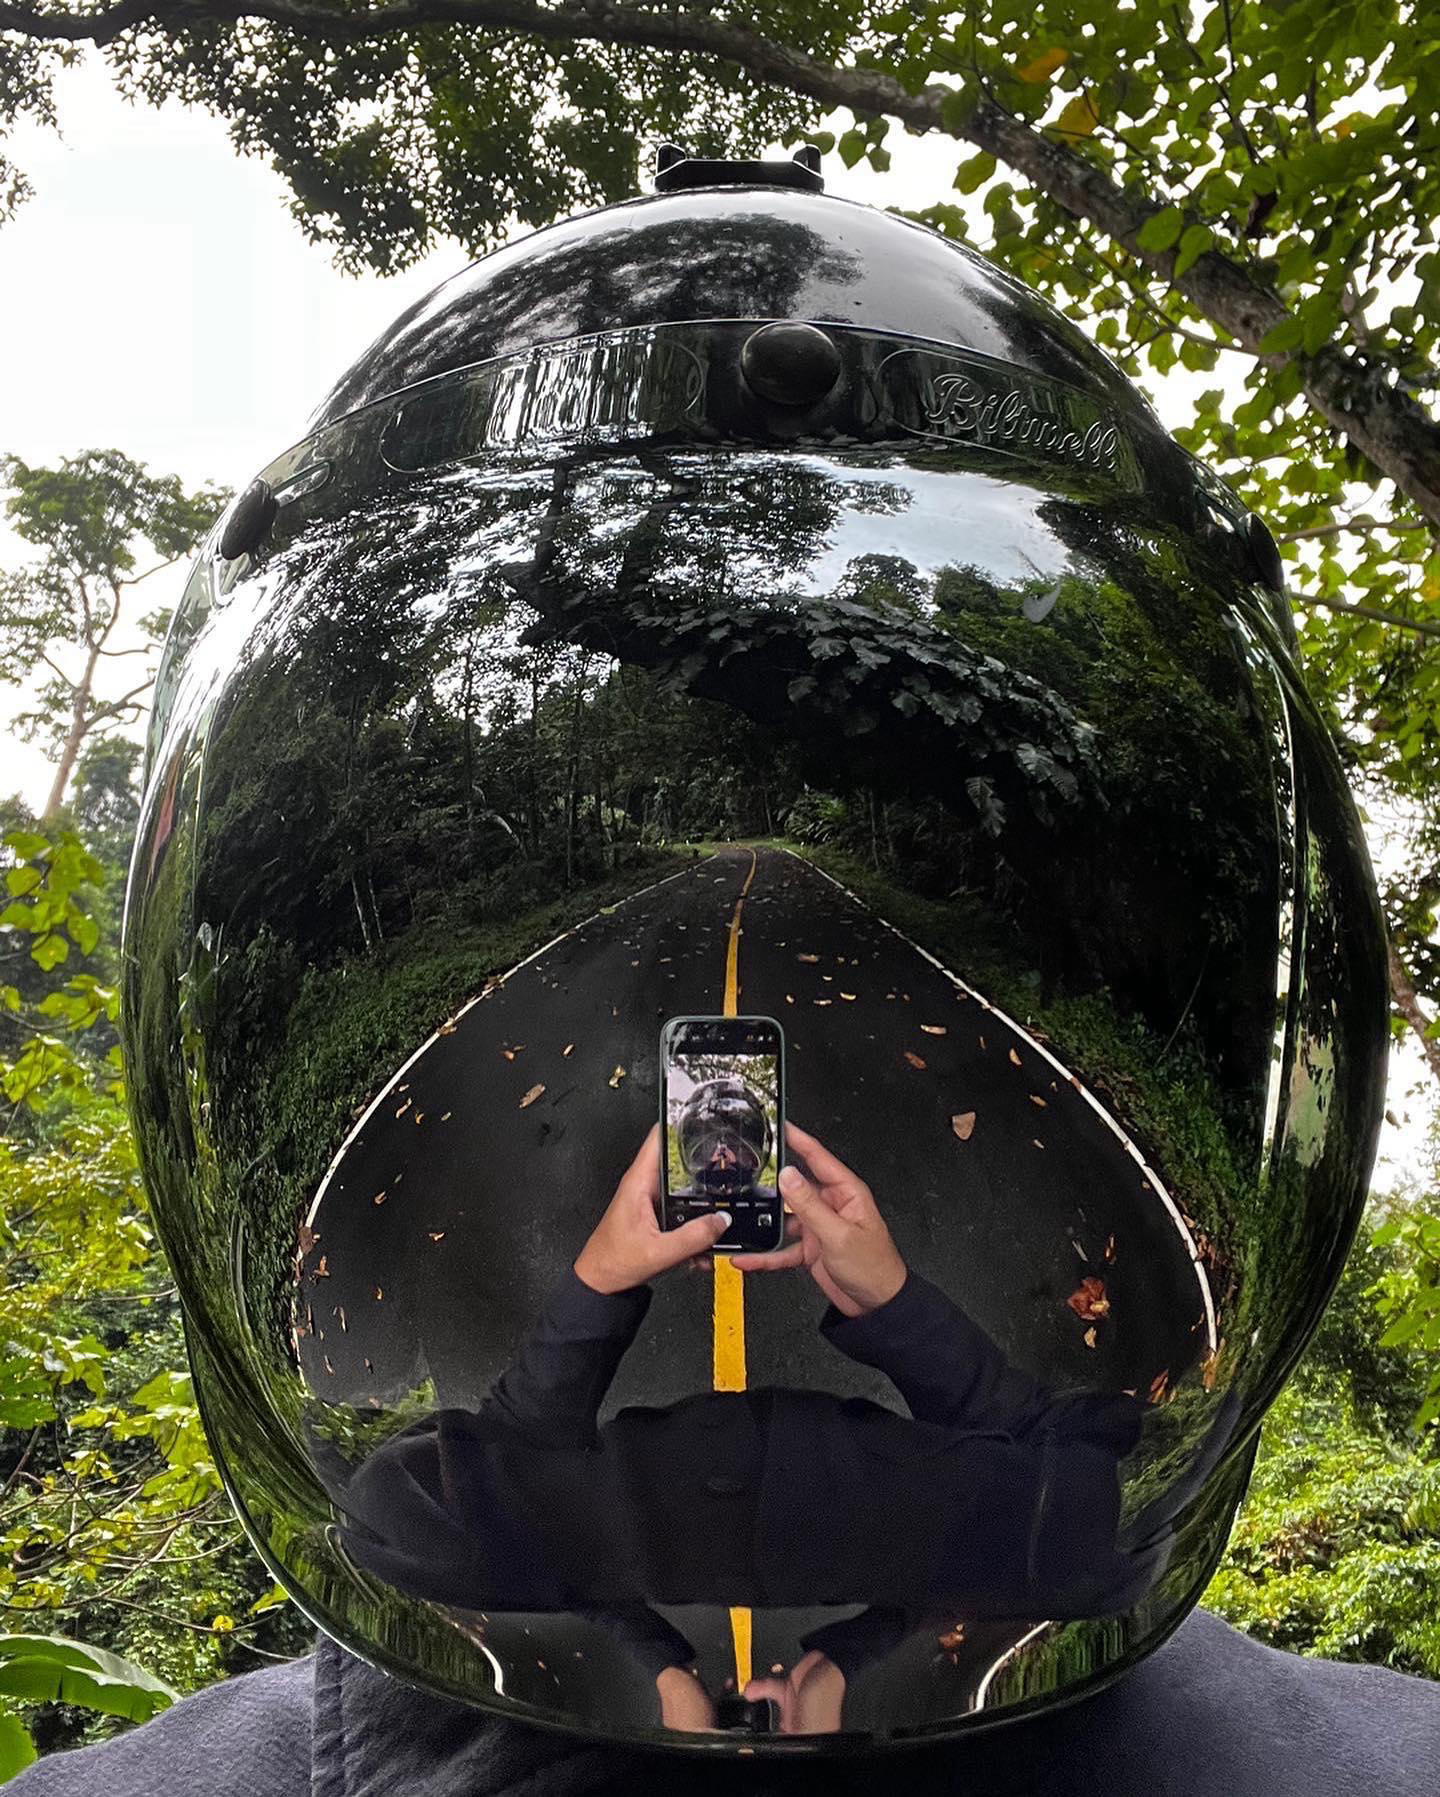 image  1 apple - I like playing with the reflection of my helmet in the front camera to see the forest aroun